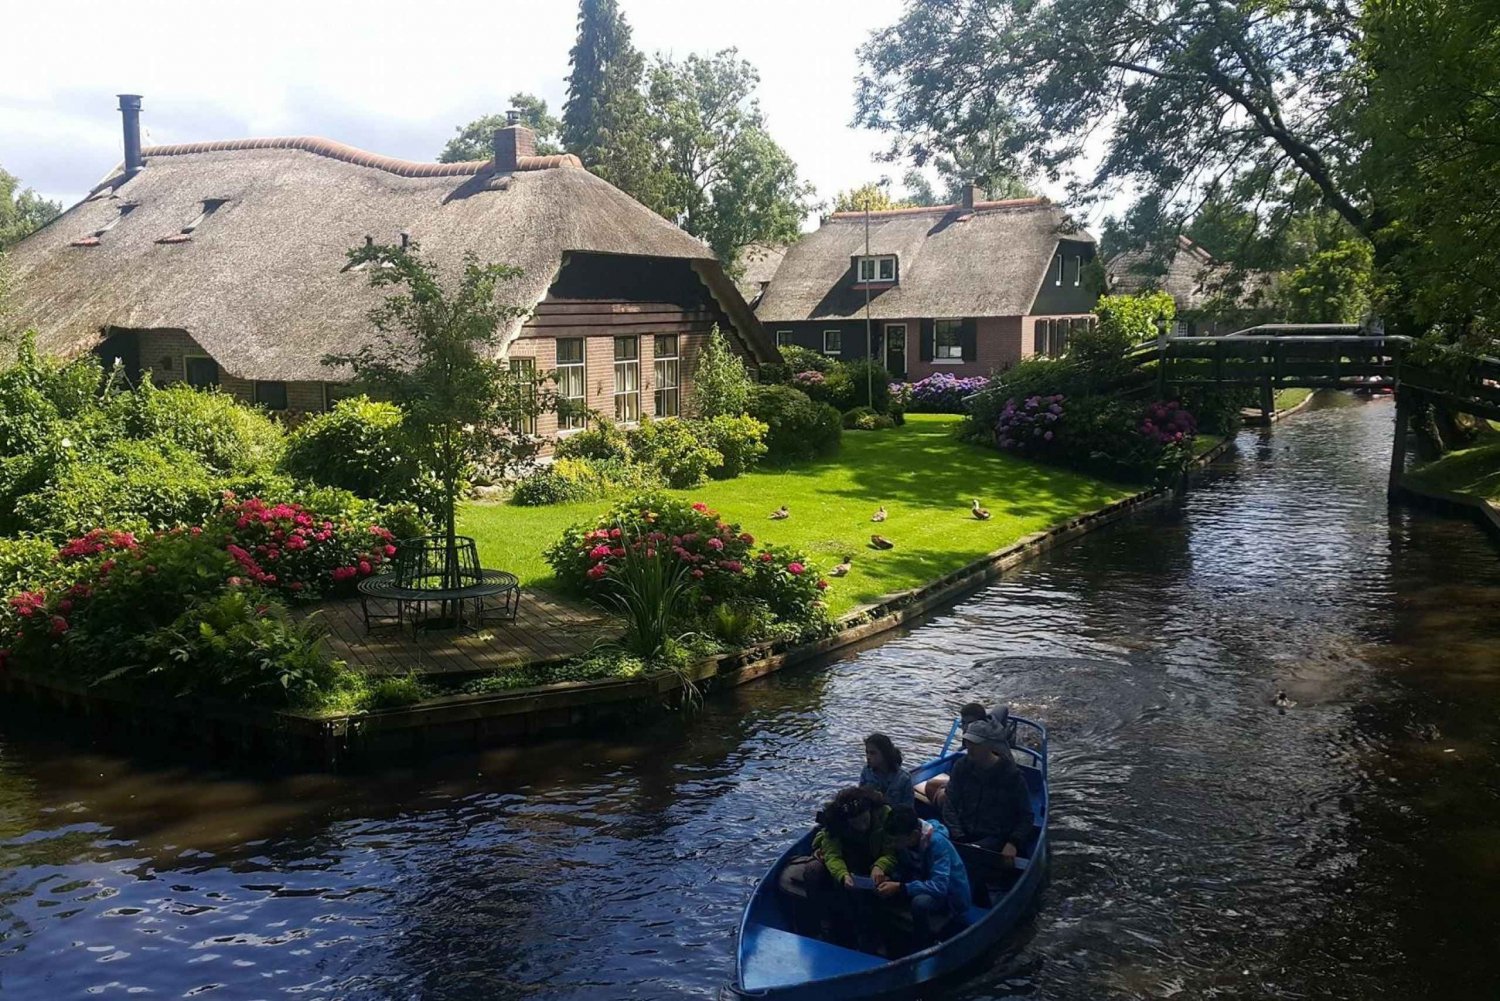 From Amsterdam: Giethoorn & Zaanse Schans Day Tour with Boat